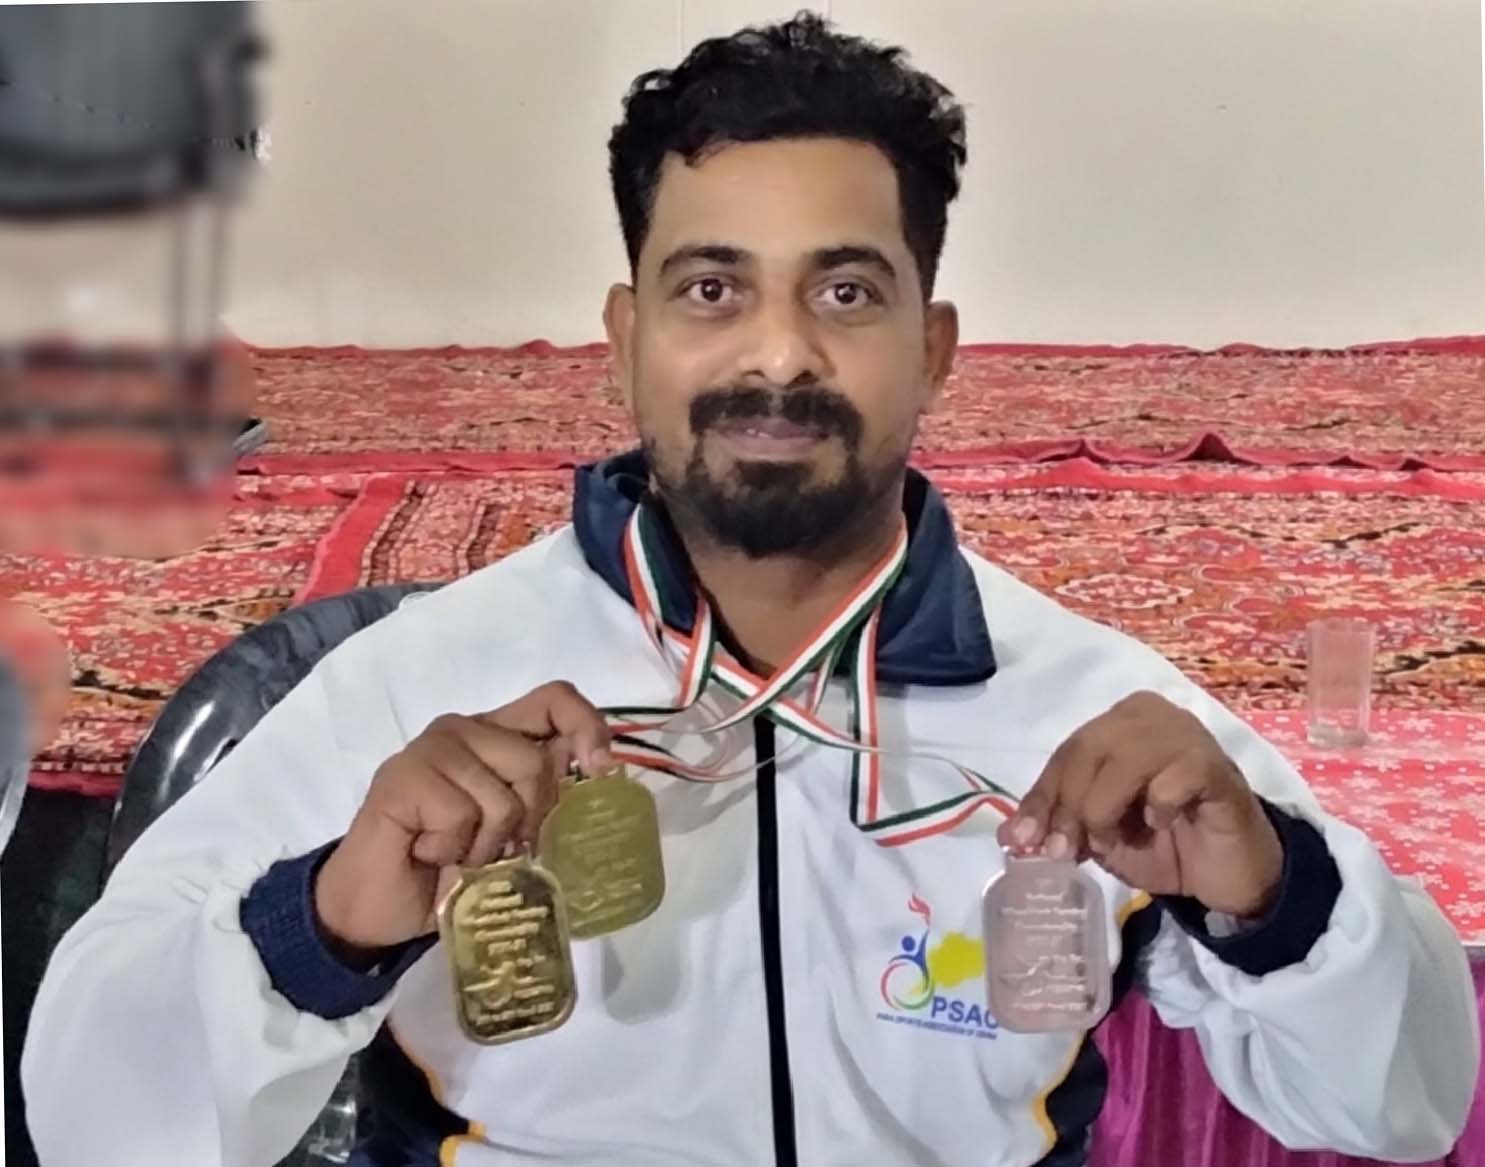 Odisha para-fencer Prafulla Khandayatray with his gold and silver medals at the 13th National Wheelchair Fenching Championship in Karnal, Haryana on 28 March, 2021.